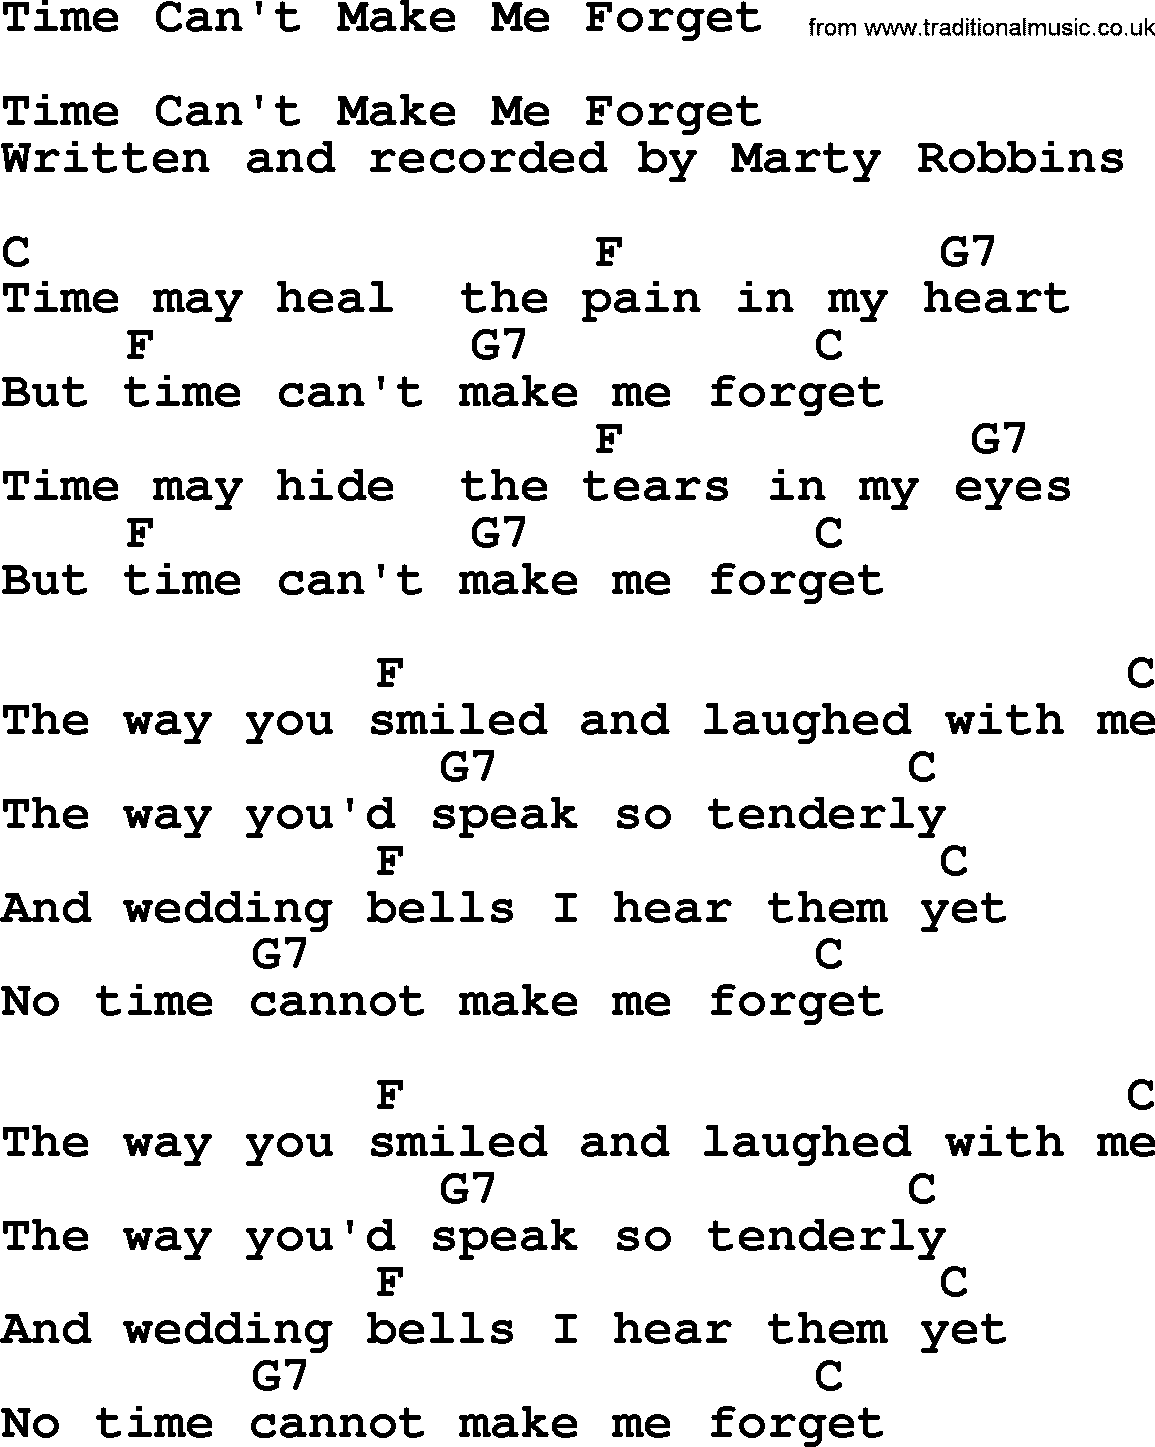 Marty Robbins song: Time Can't Make Me Forget, lyrics and chords